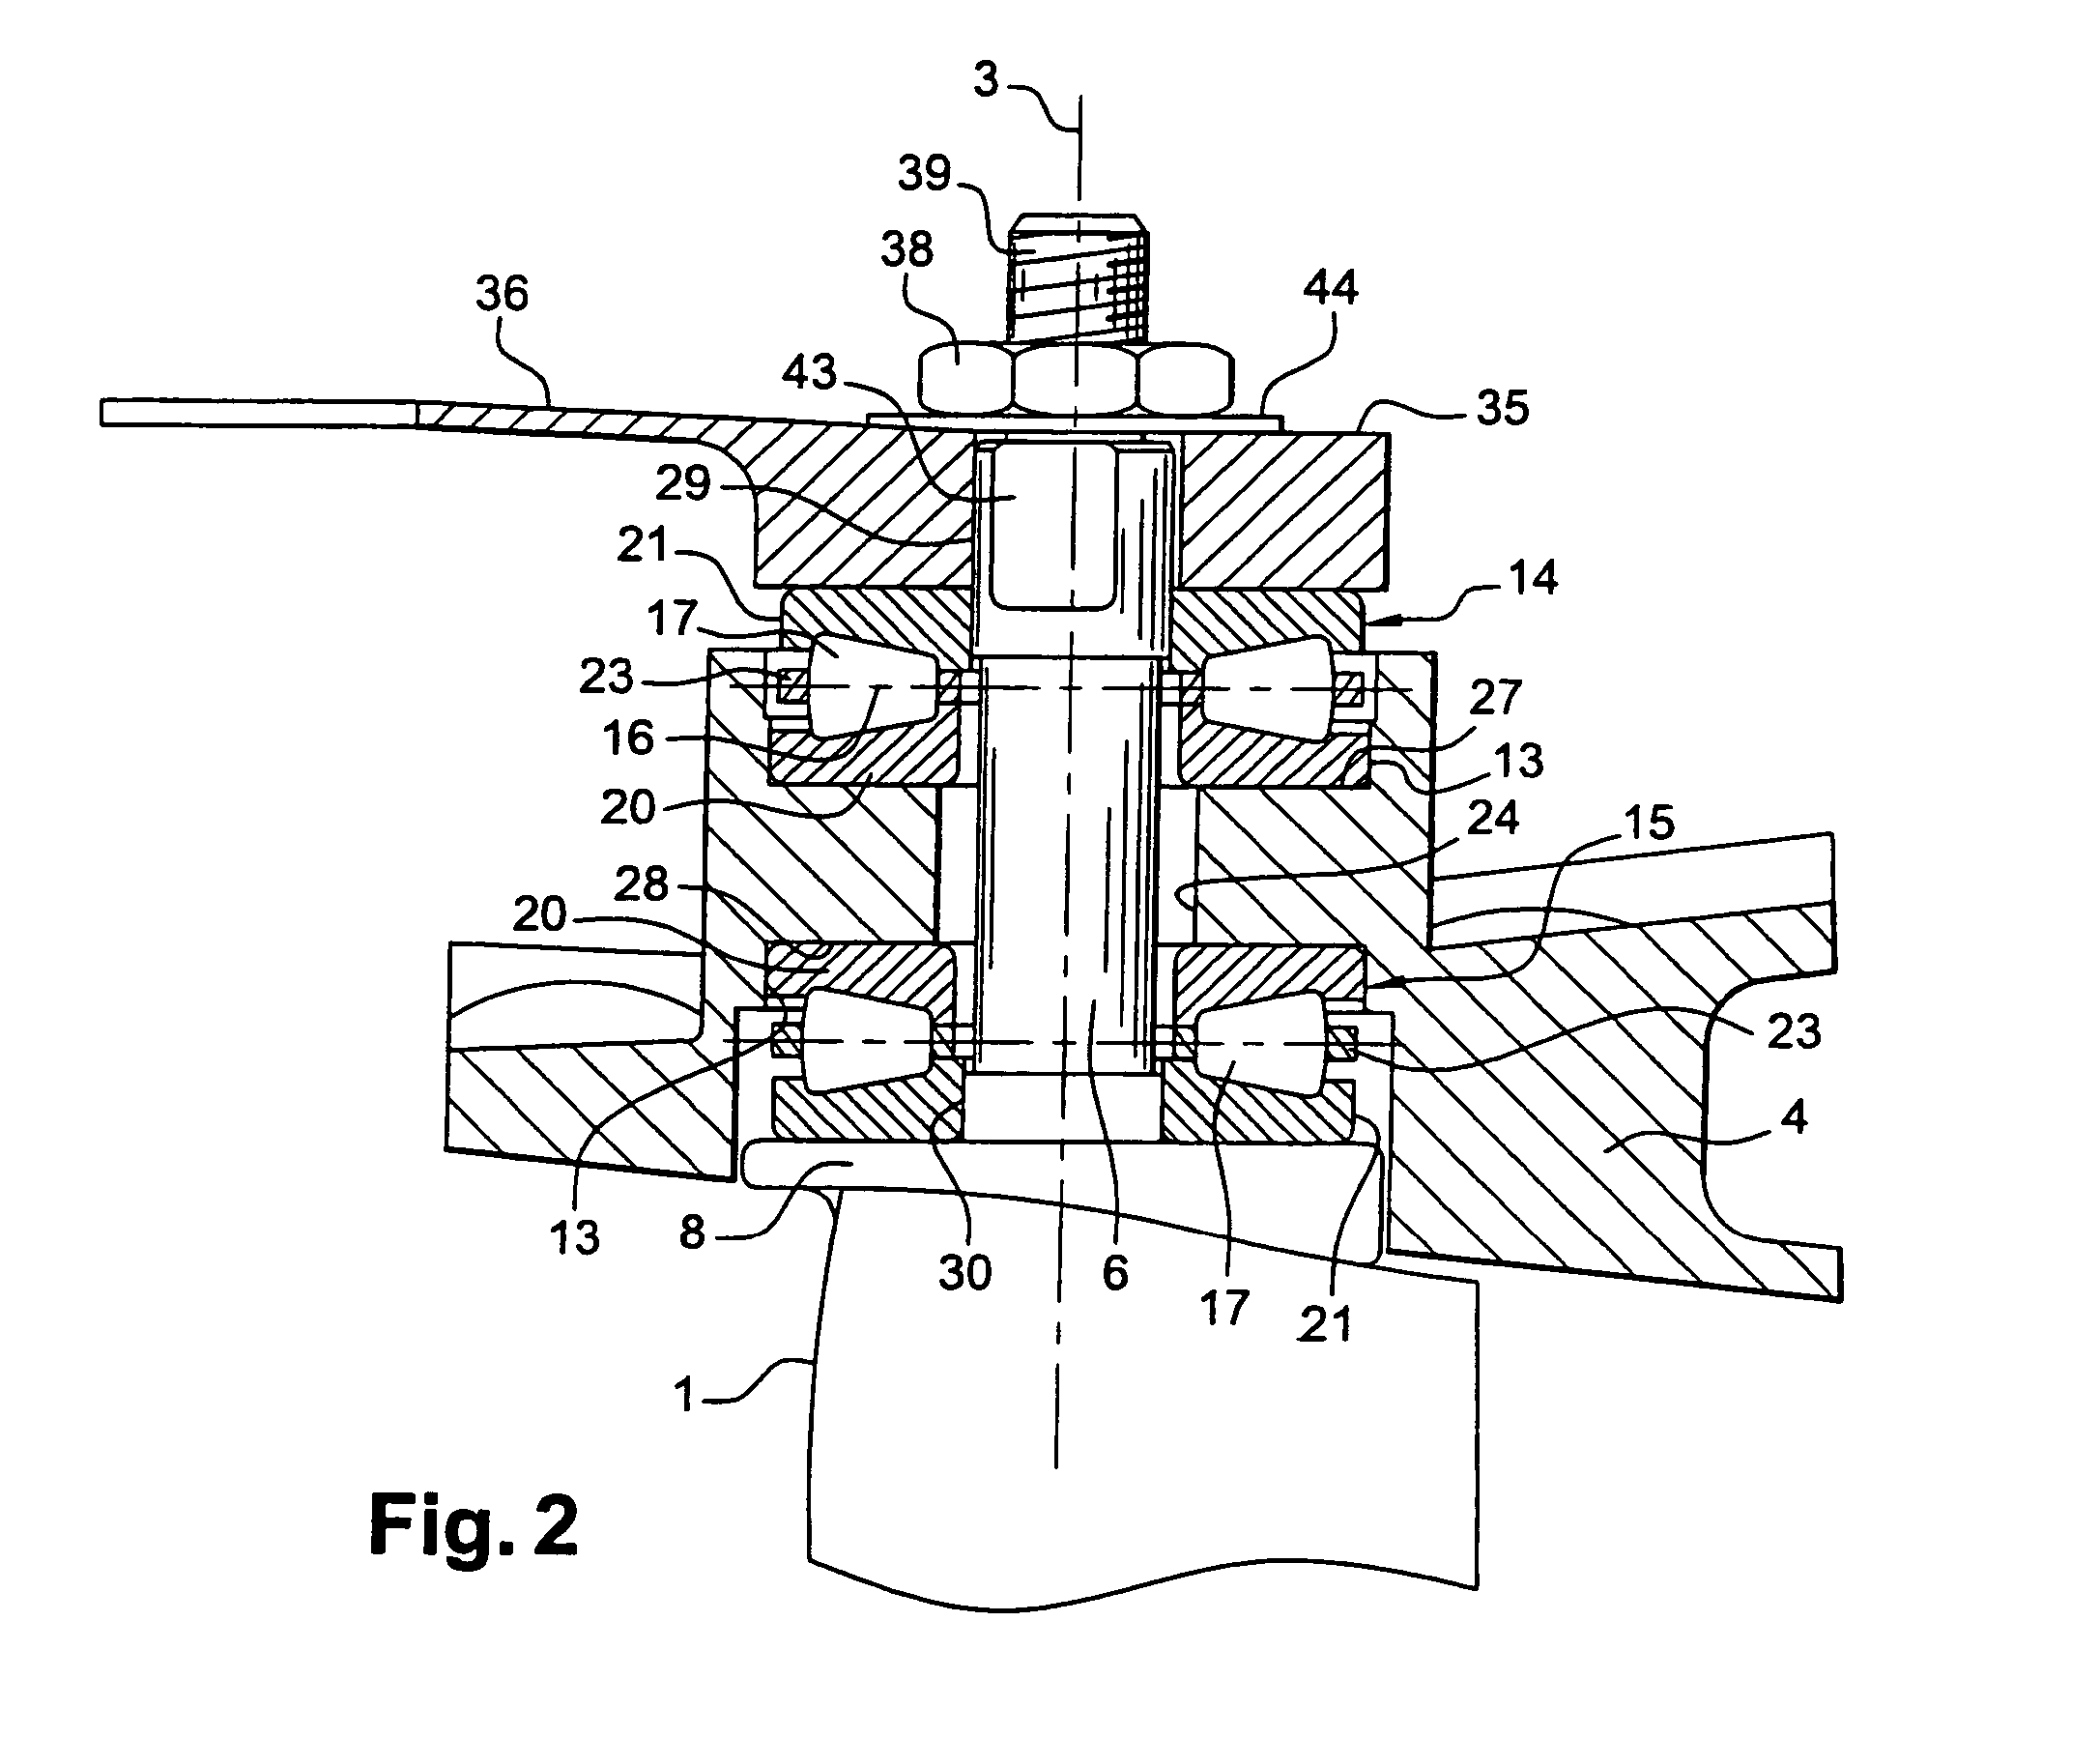 Method of guiding a blade having a variable pitch angle